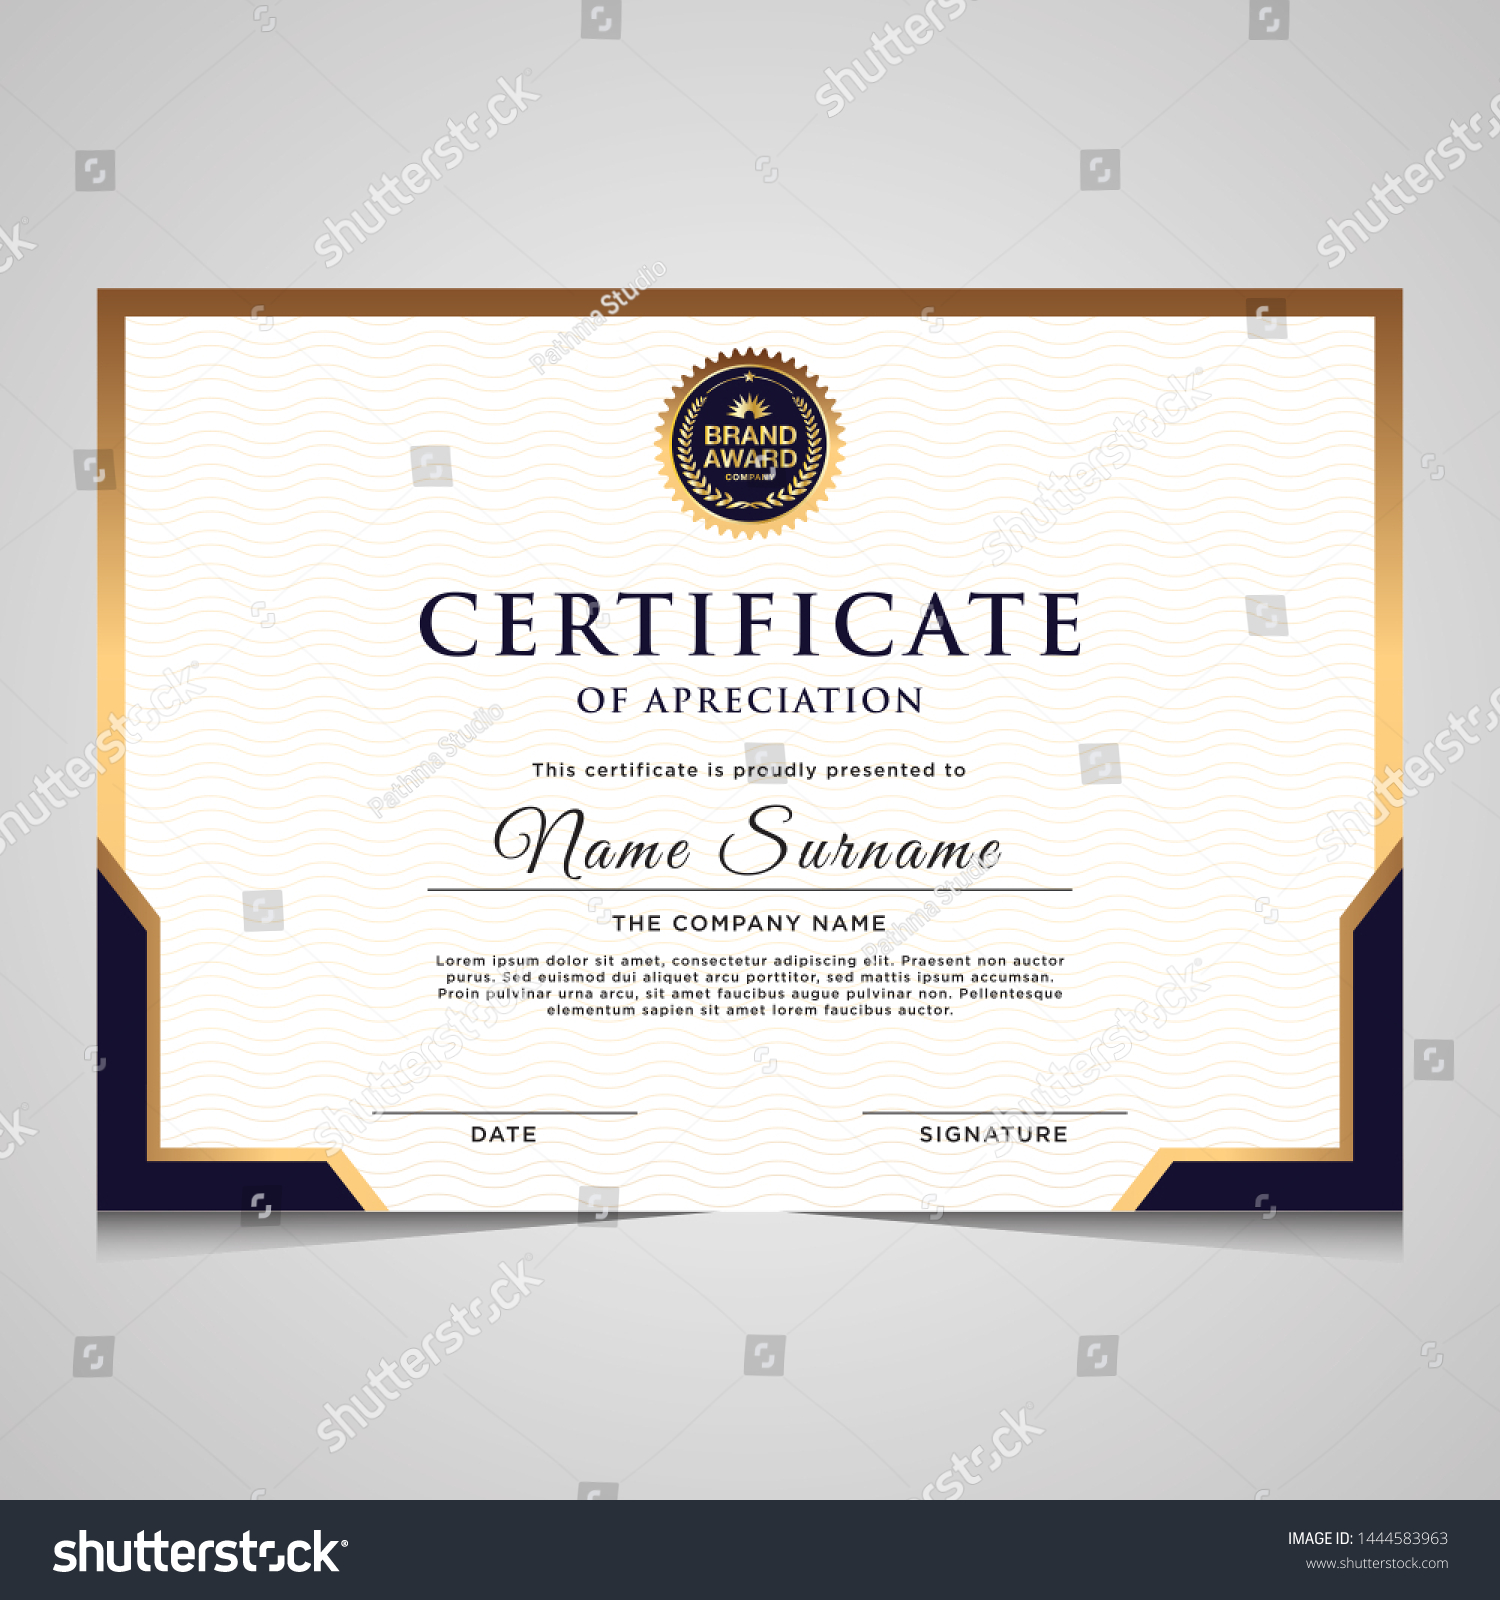 elegant blue and gold diploma certificate template. Use for print, certificate, diploma, graduation #1444583963